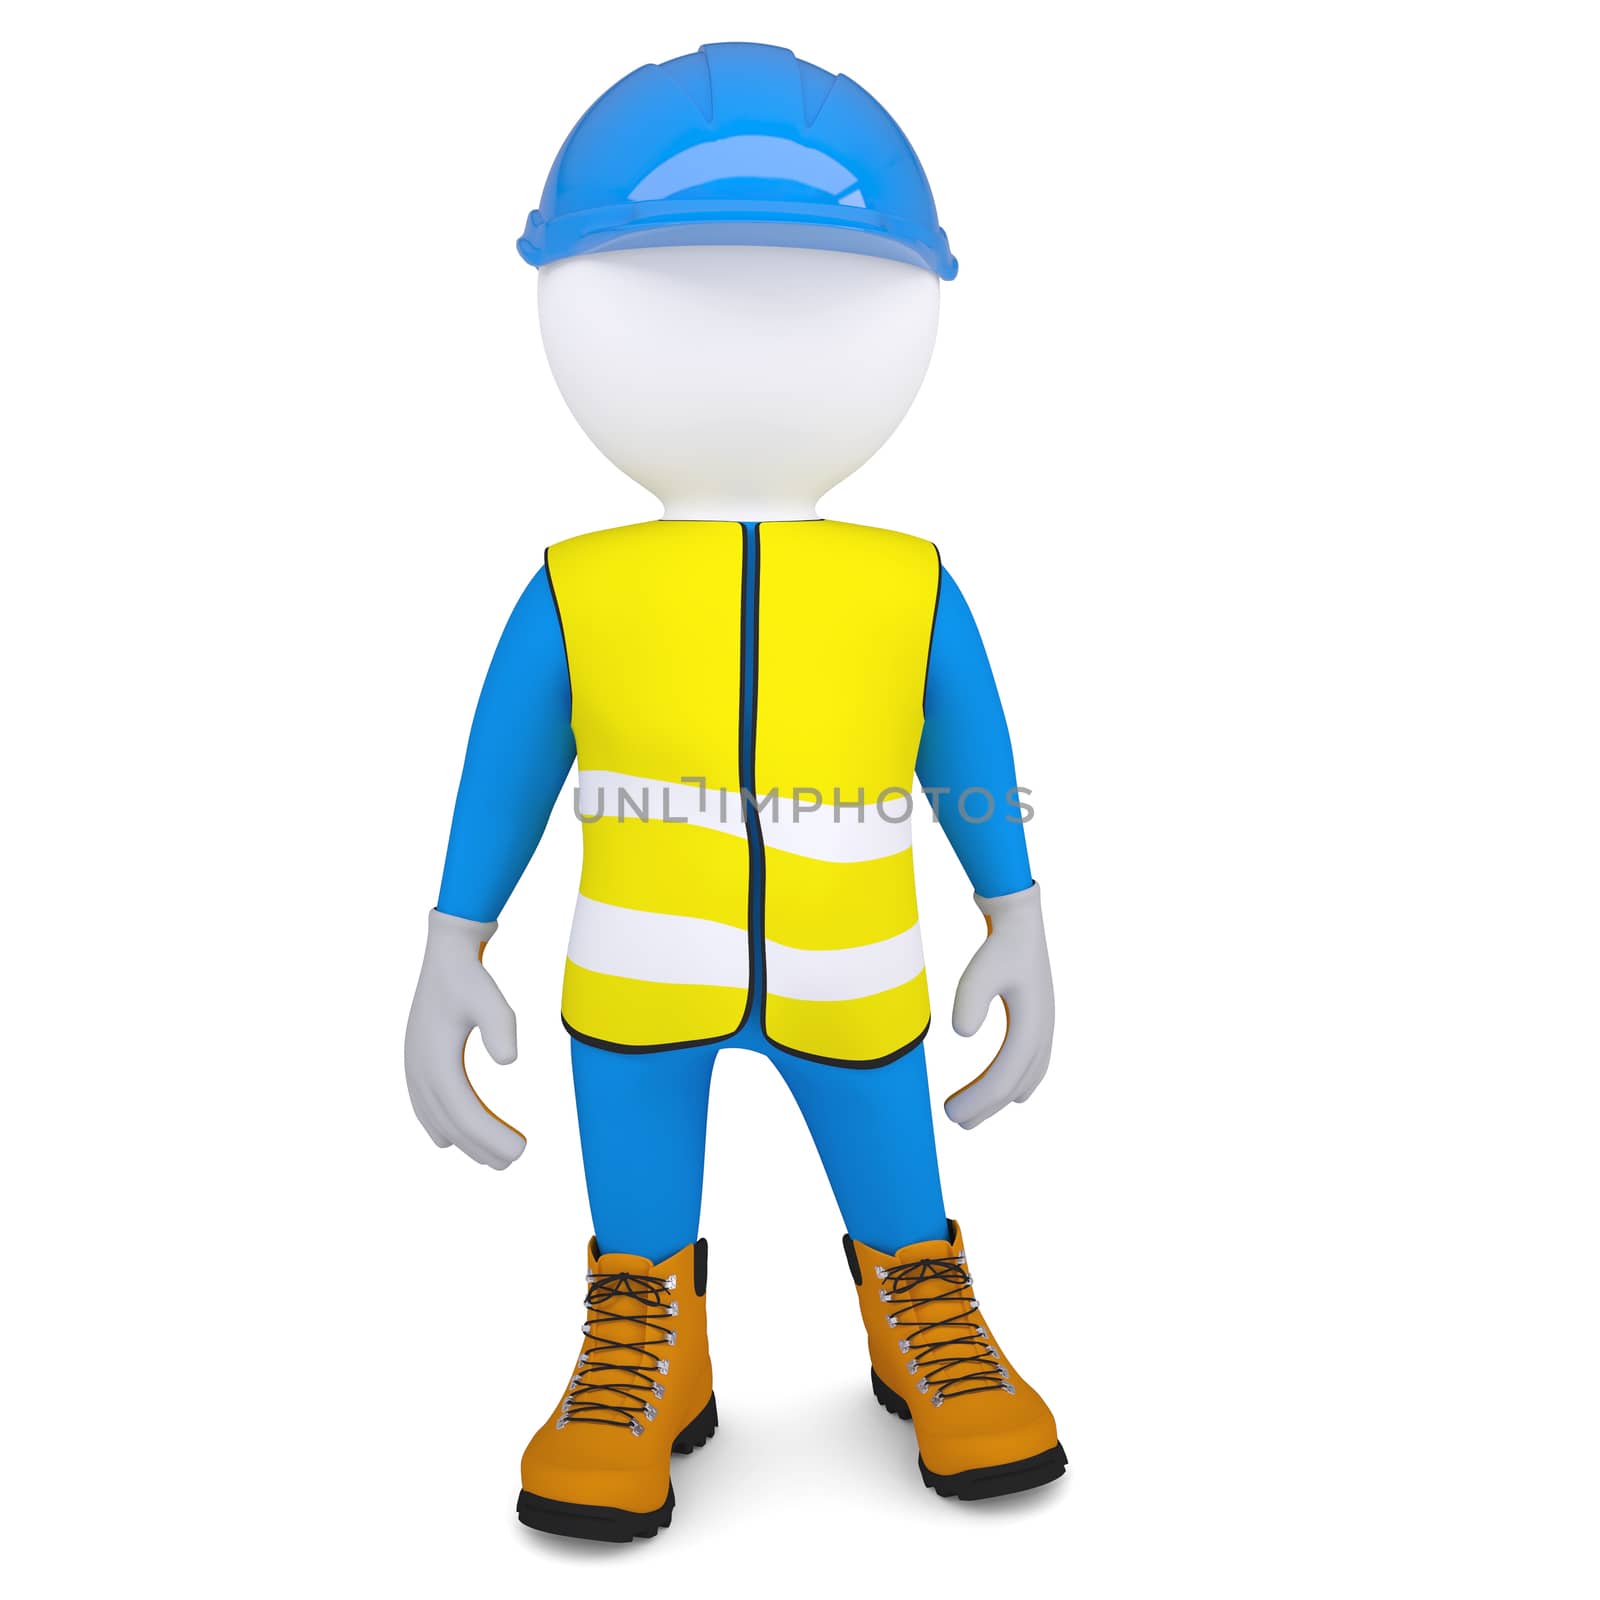 3d white man in overalls. Isolated render on a white background